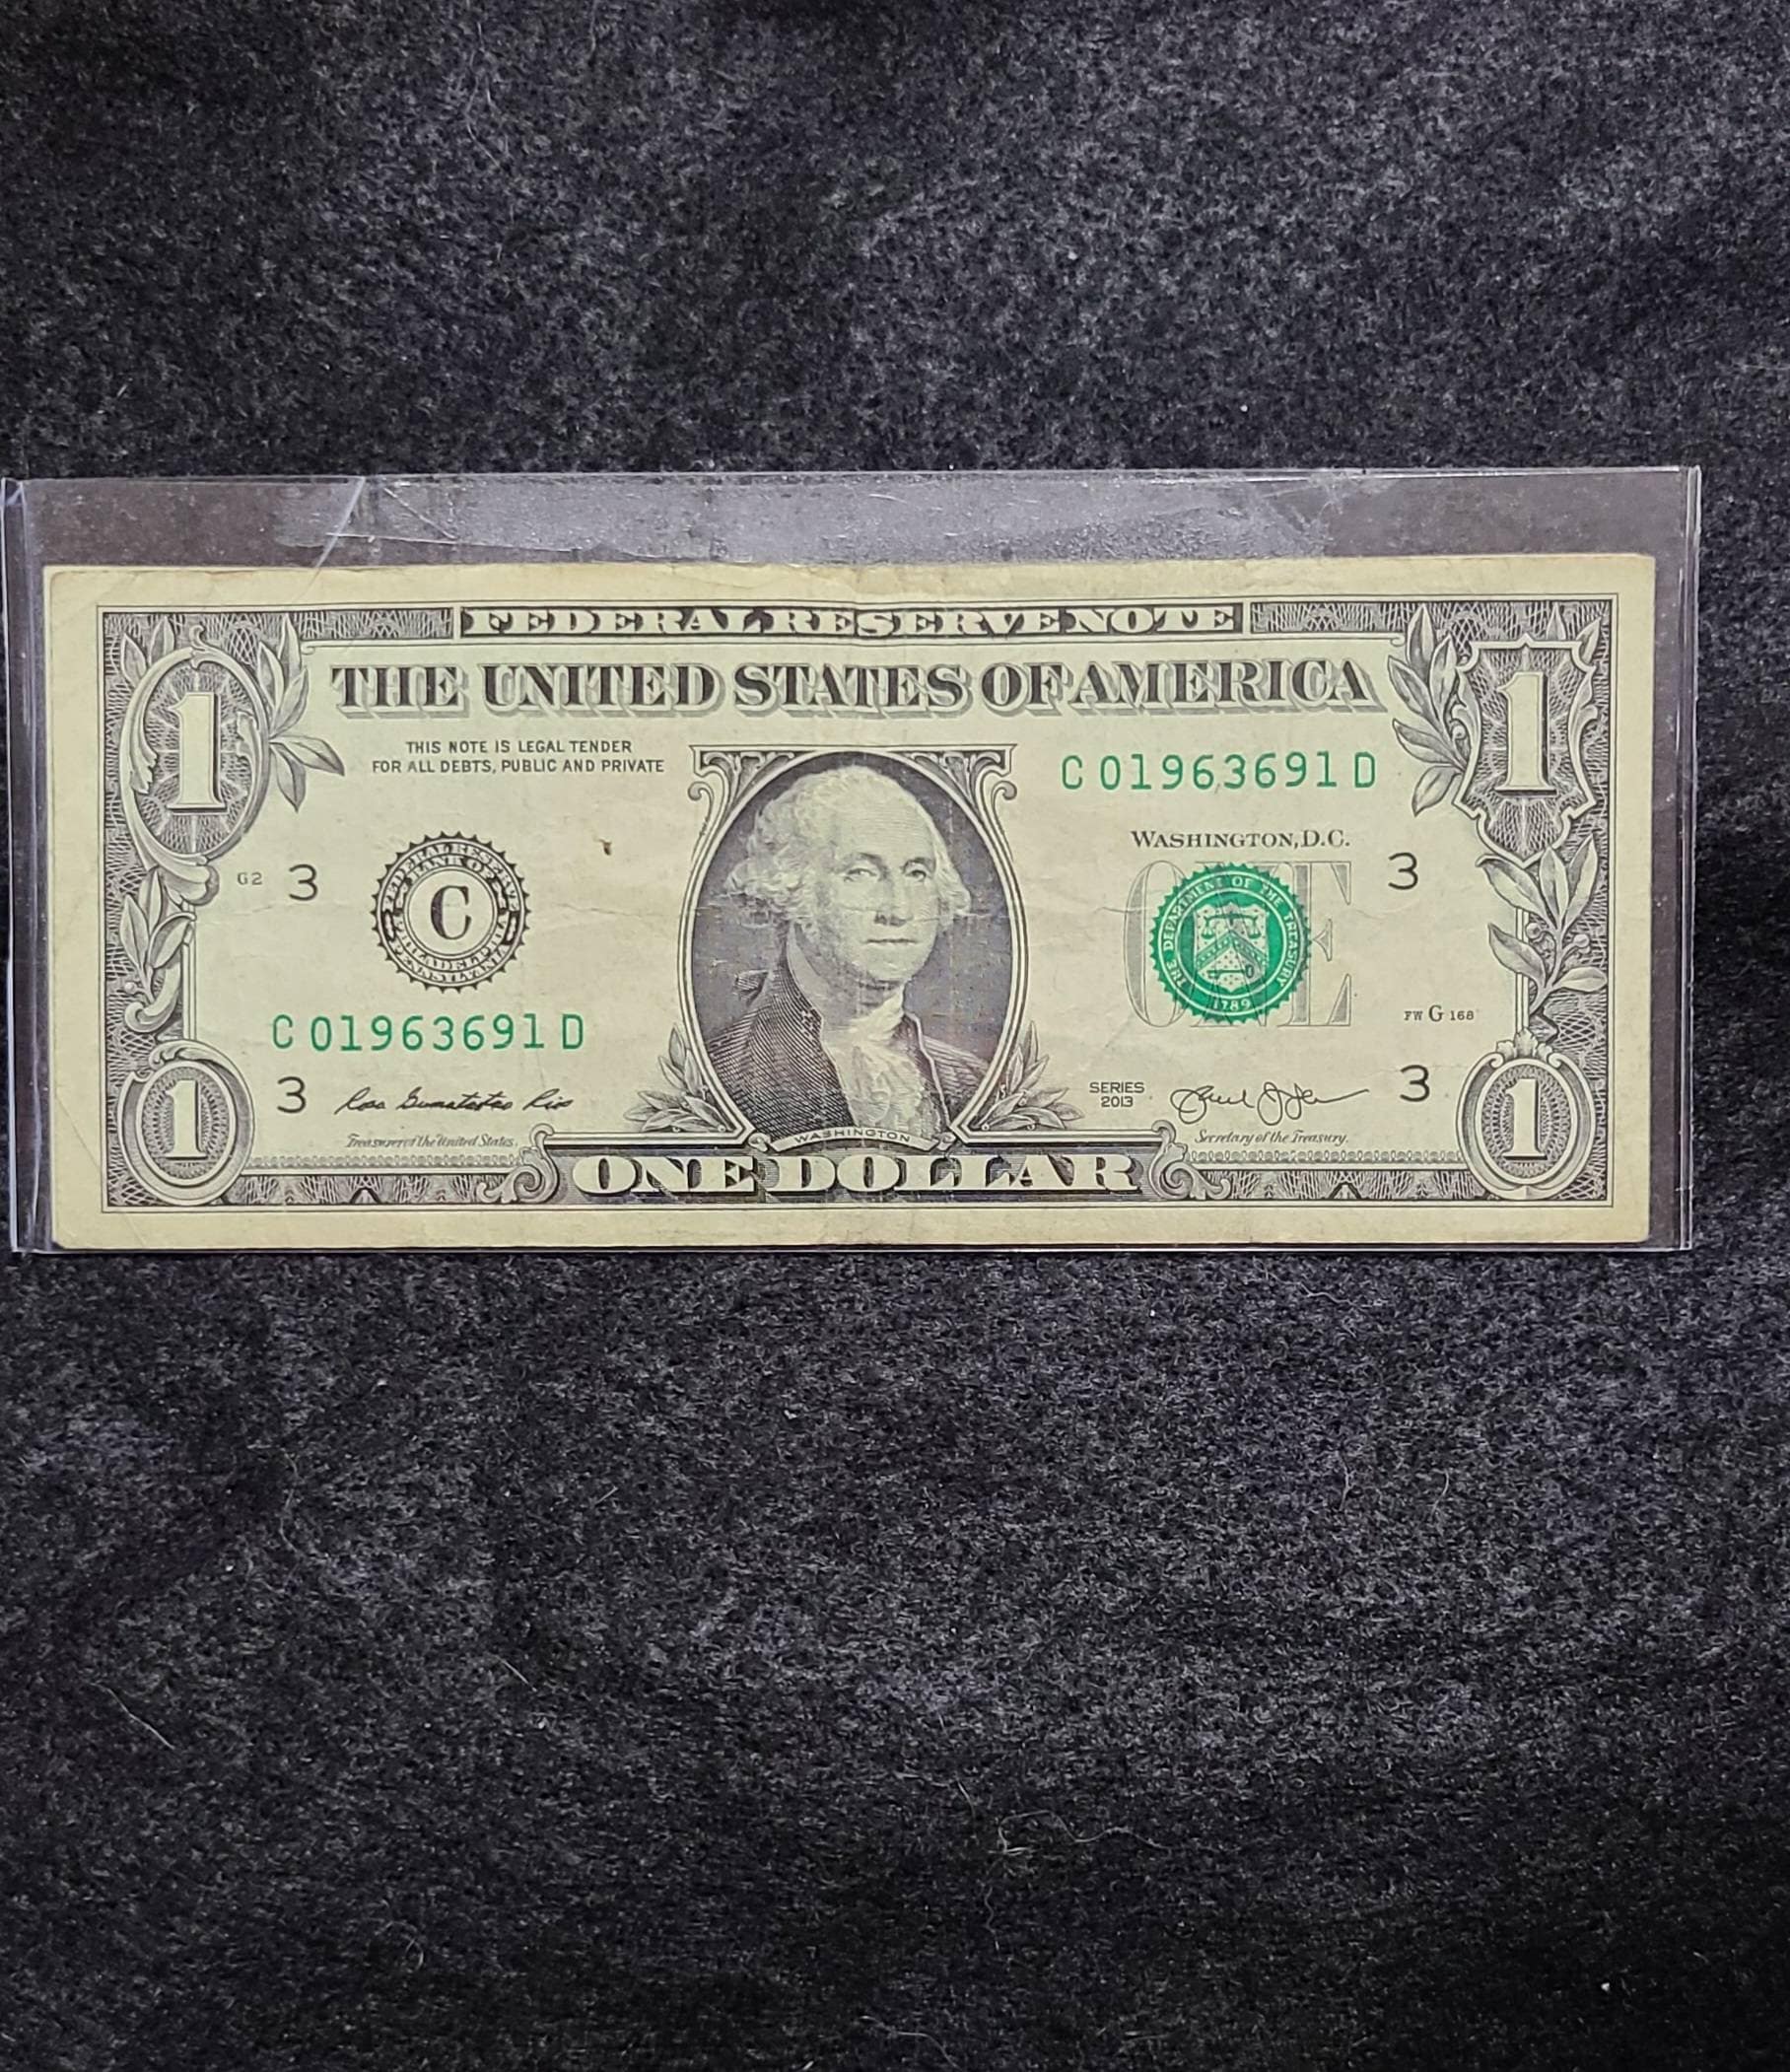 Rare Unique Fancy One Dollar Bill with Serial Number 1234567. Free Shipping